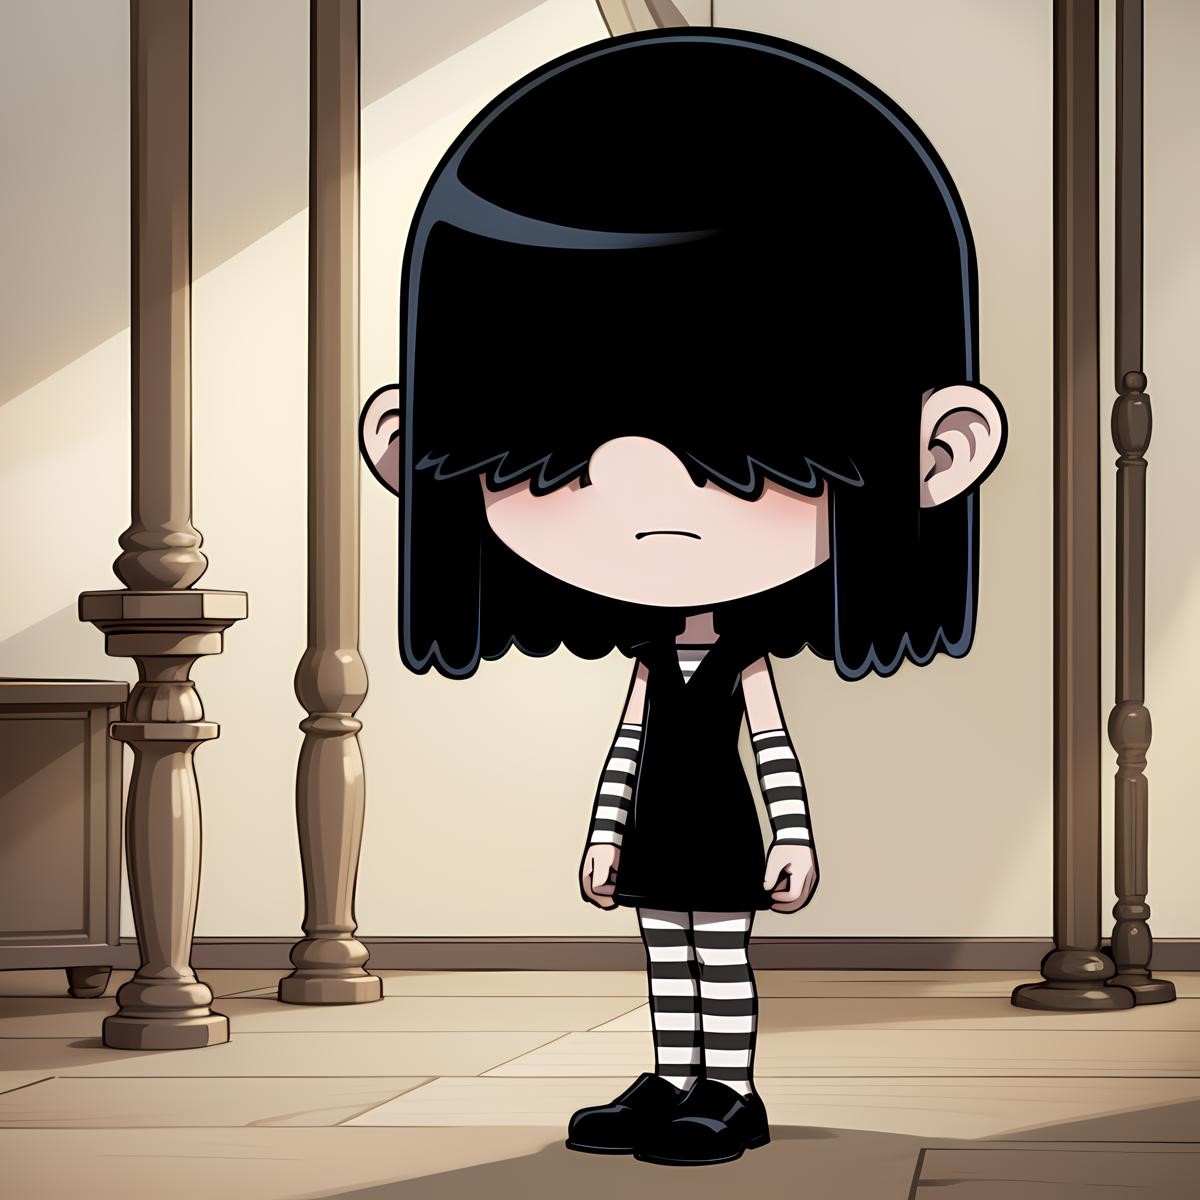 25 Facts About Lucy Loud (The Loud House) - Facts.net